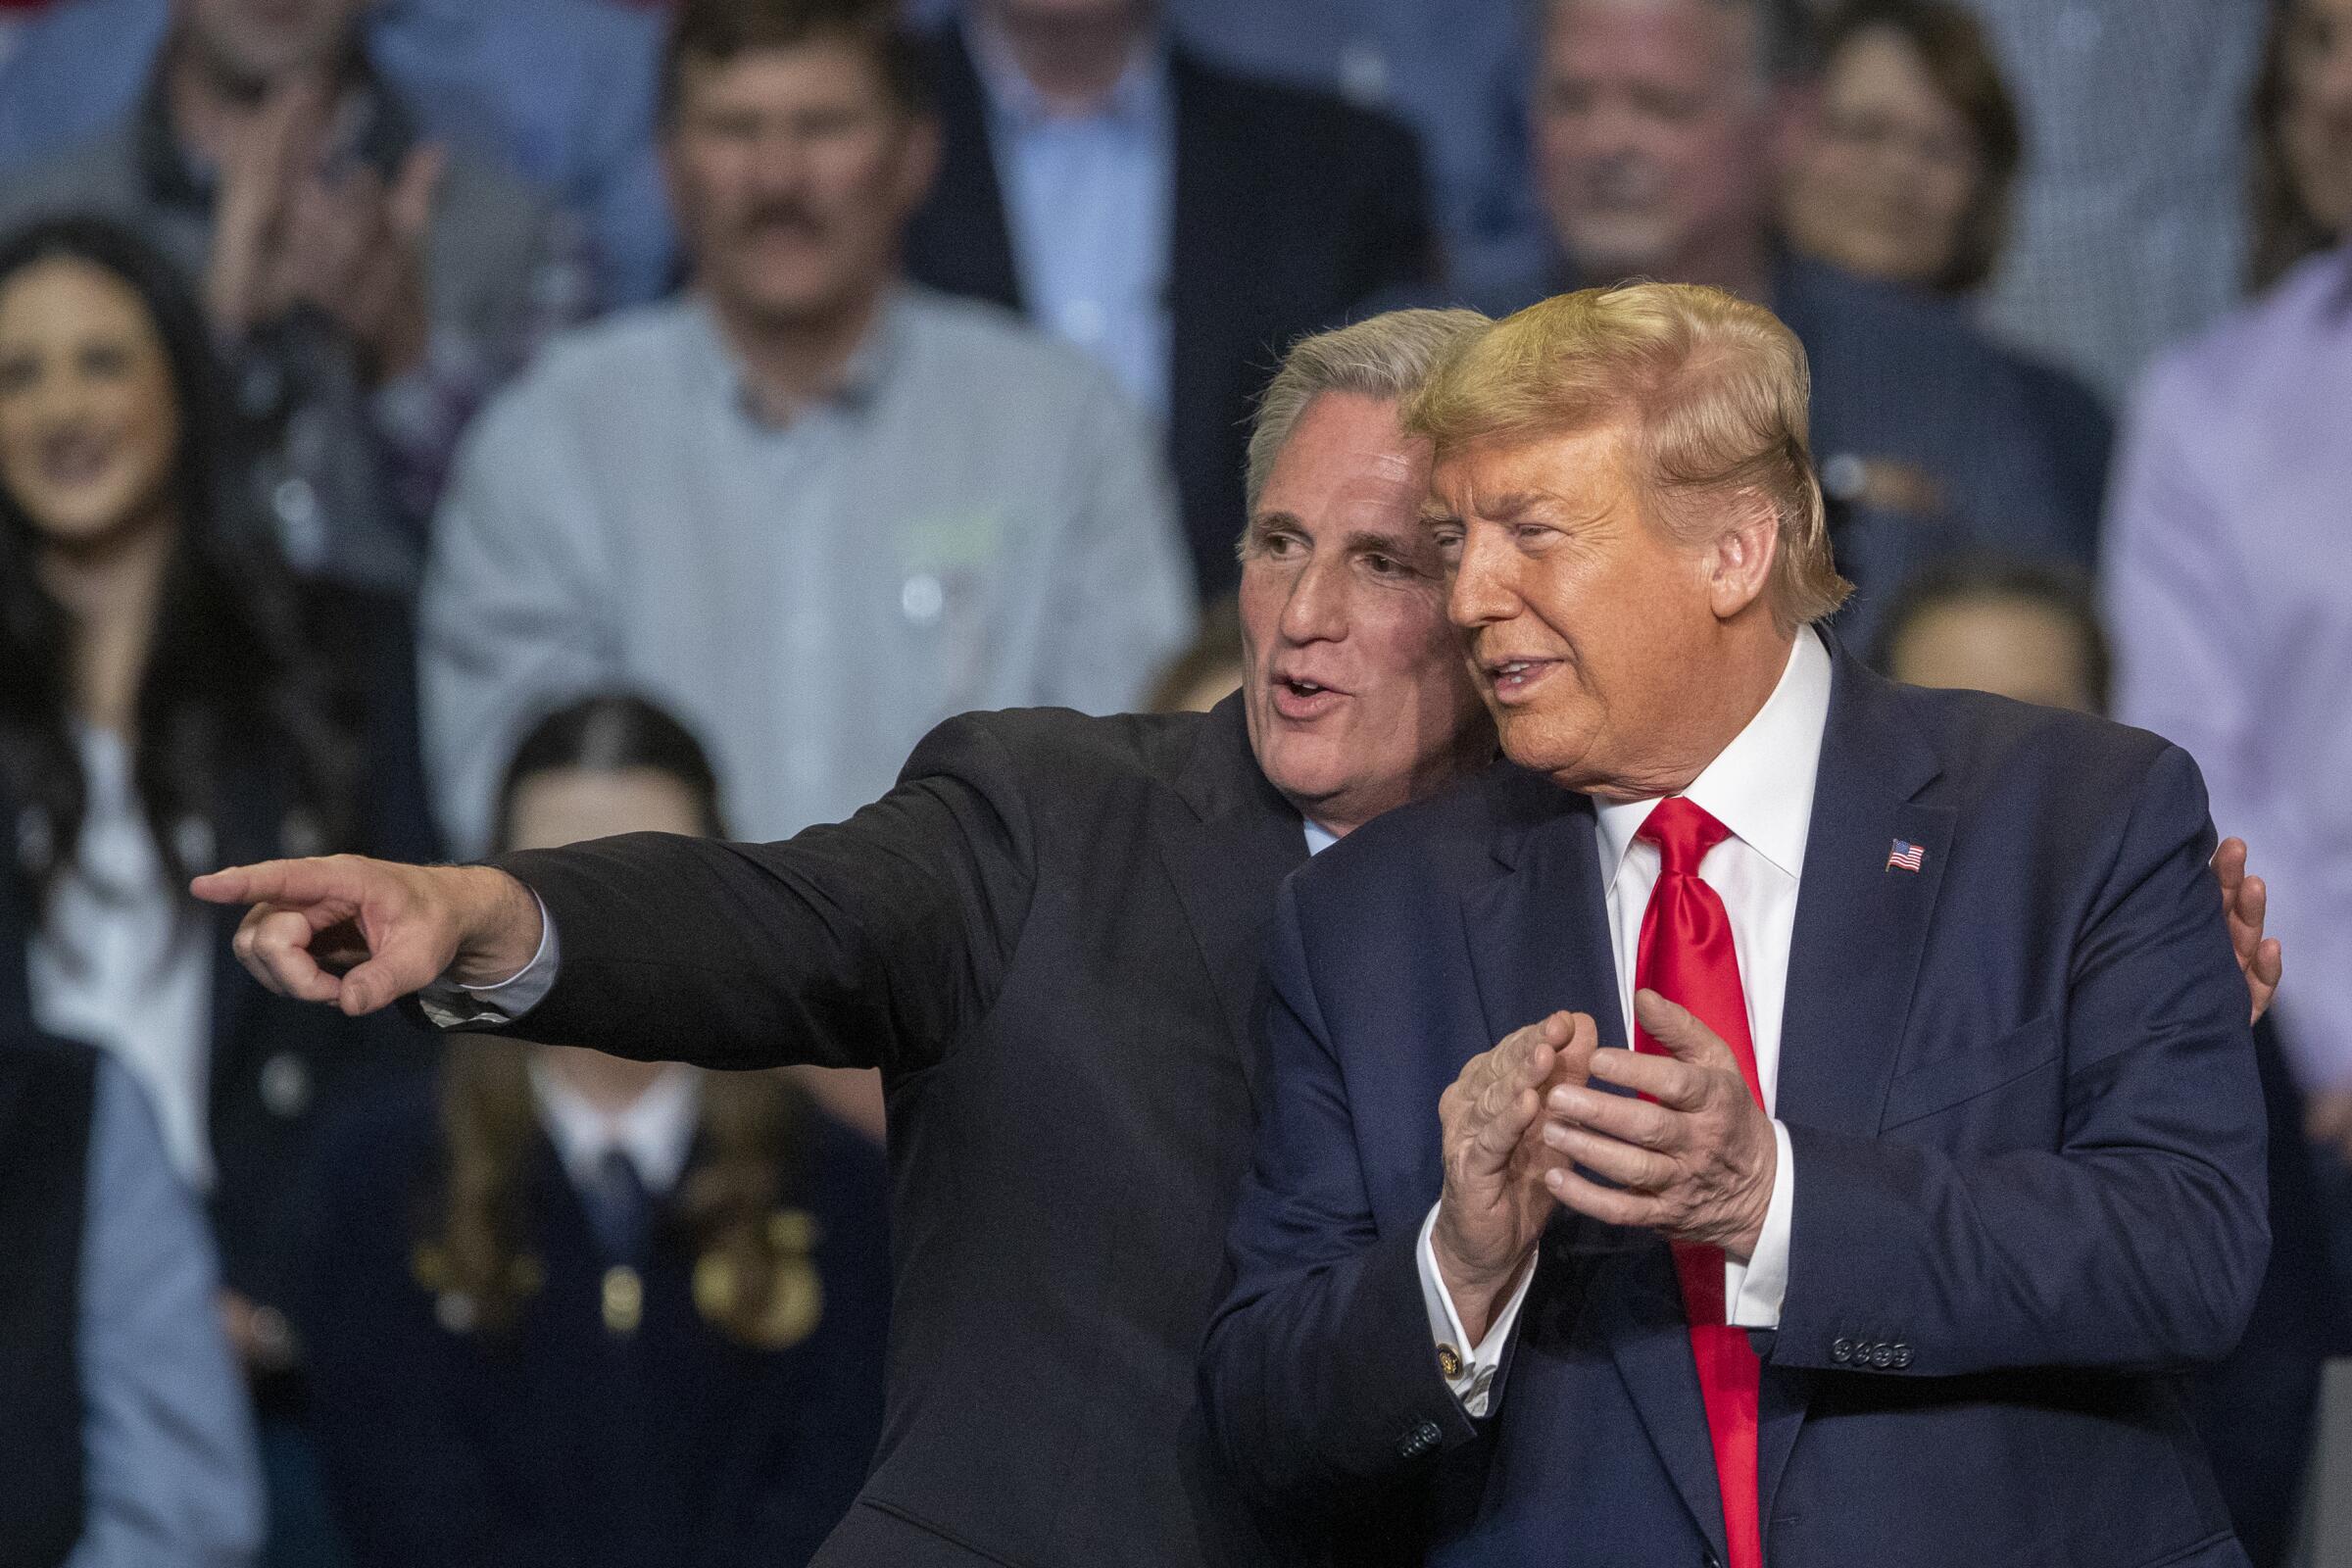 Kevin McCarthy stands with an arm around Donald Trump in front of an audience, pointing away as Trump looks and claps